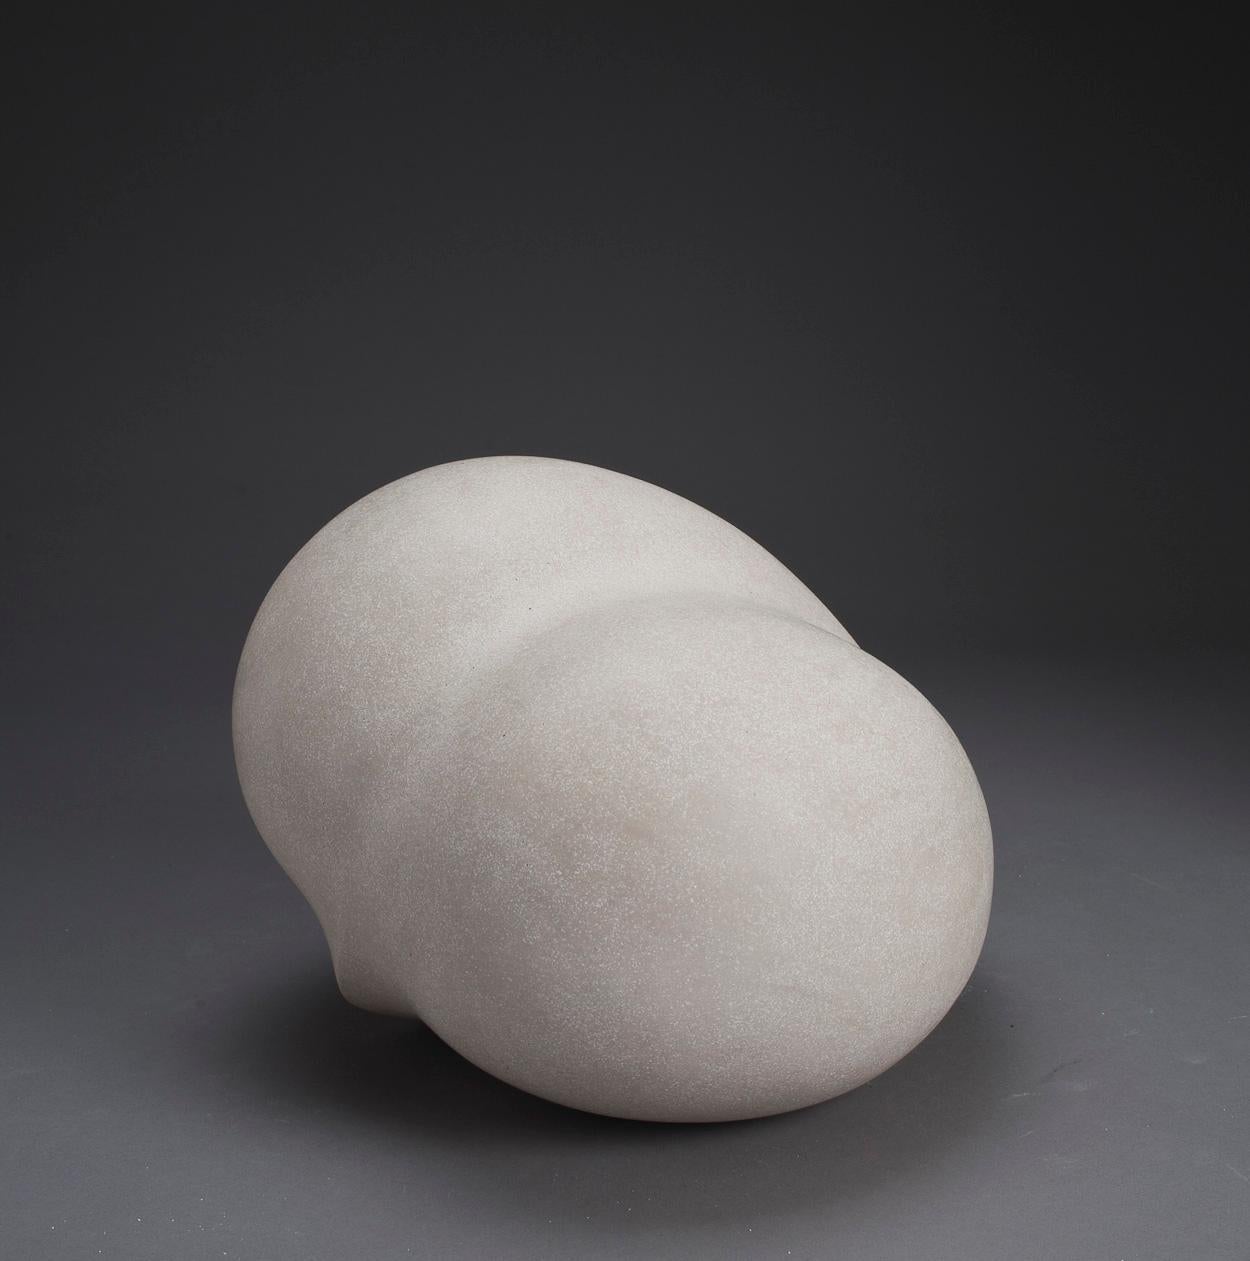 Steve Cartwright, KT

Handmade Sculptural Ceramic, Stoneware Clay, fired to 1250c

19 x 24 cm (7.4 x 9.4 in)

Edition of 5 per year